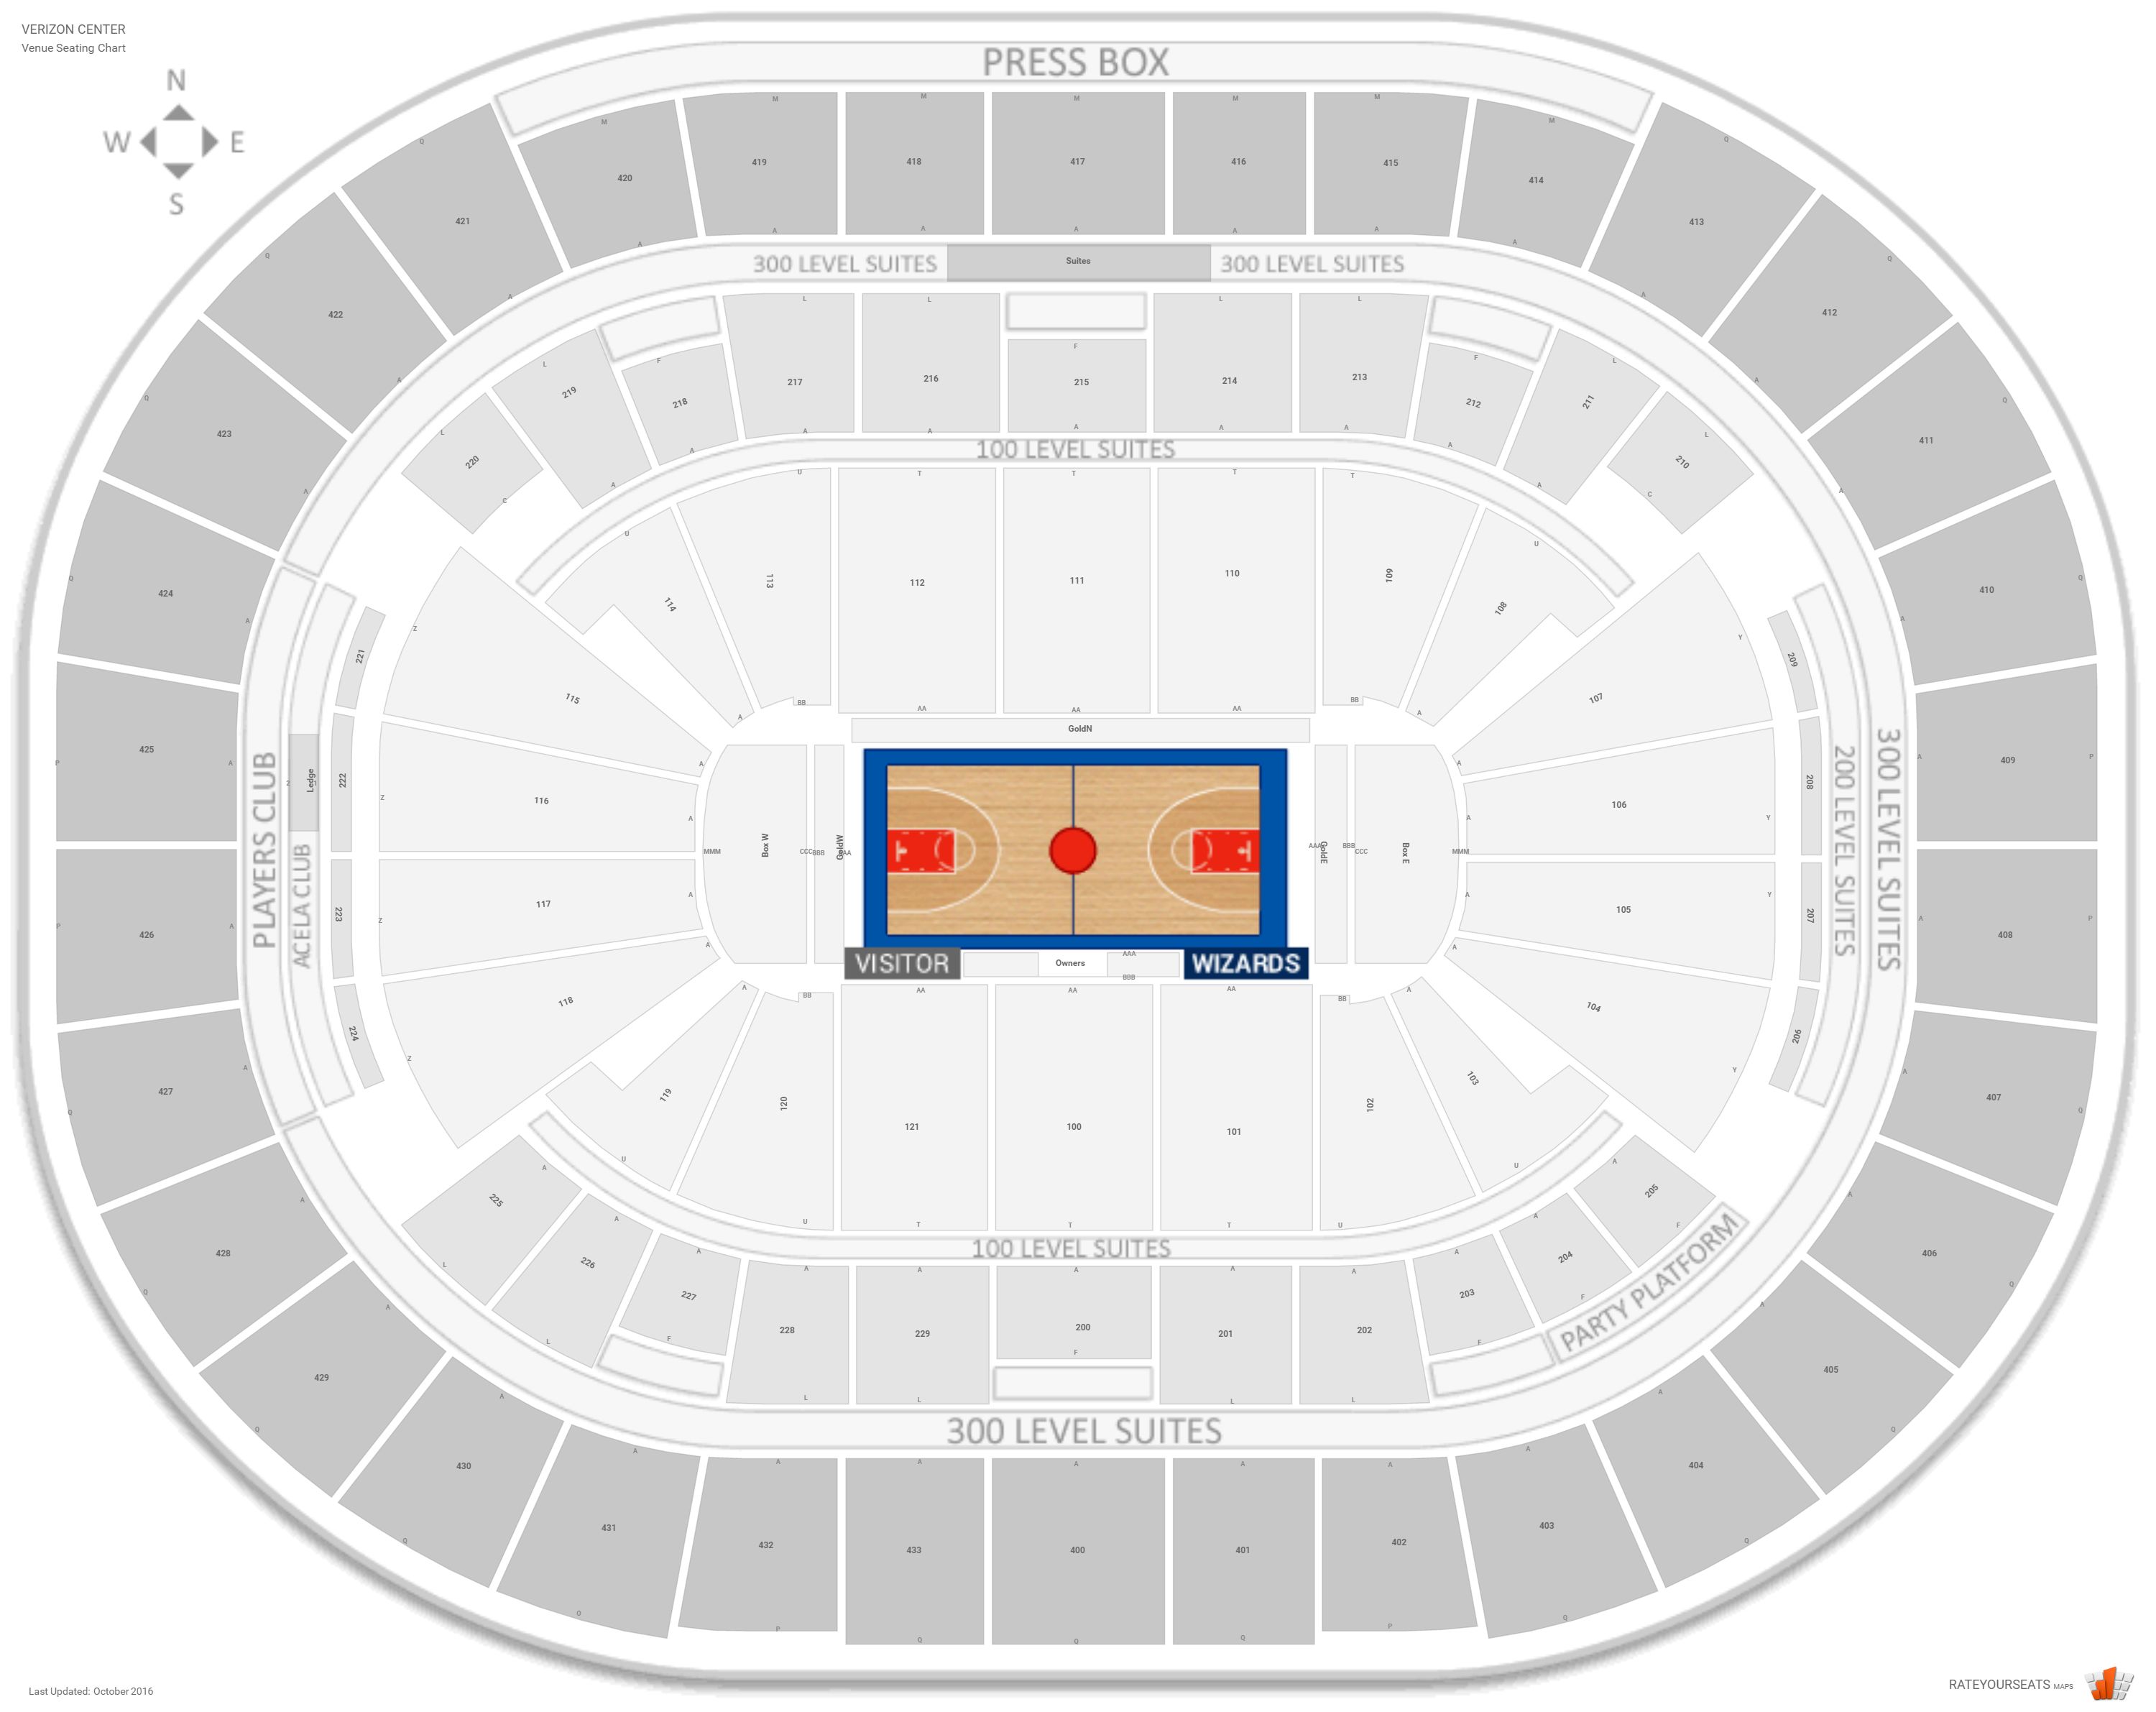 Capital One Arena Seating Chart With Seat Numbers | Awesome Home